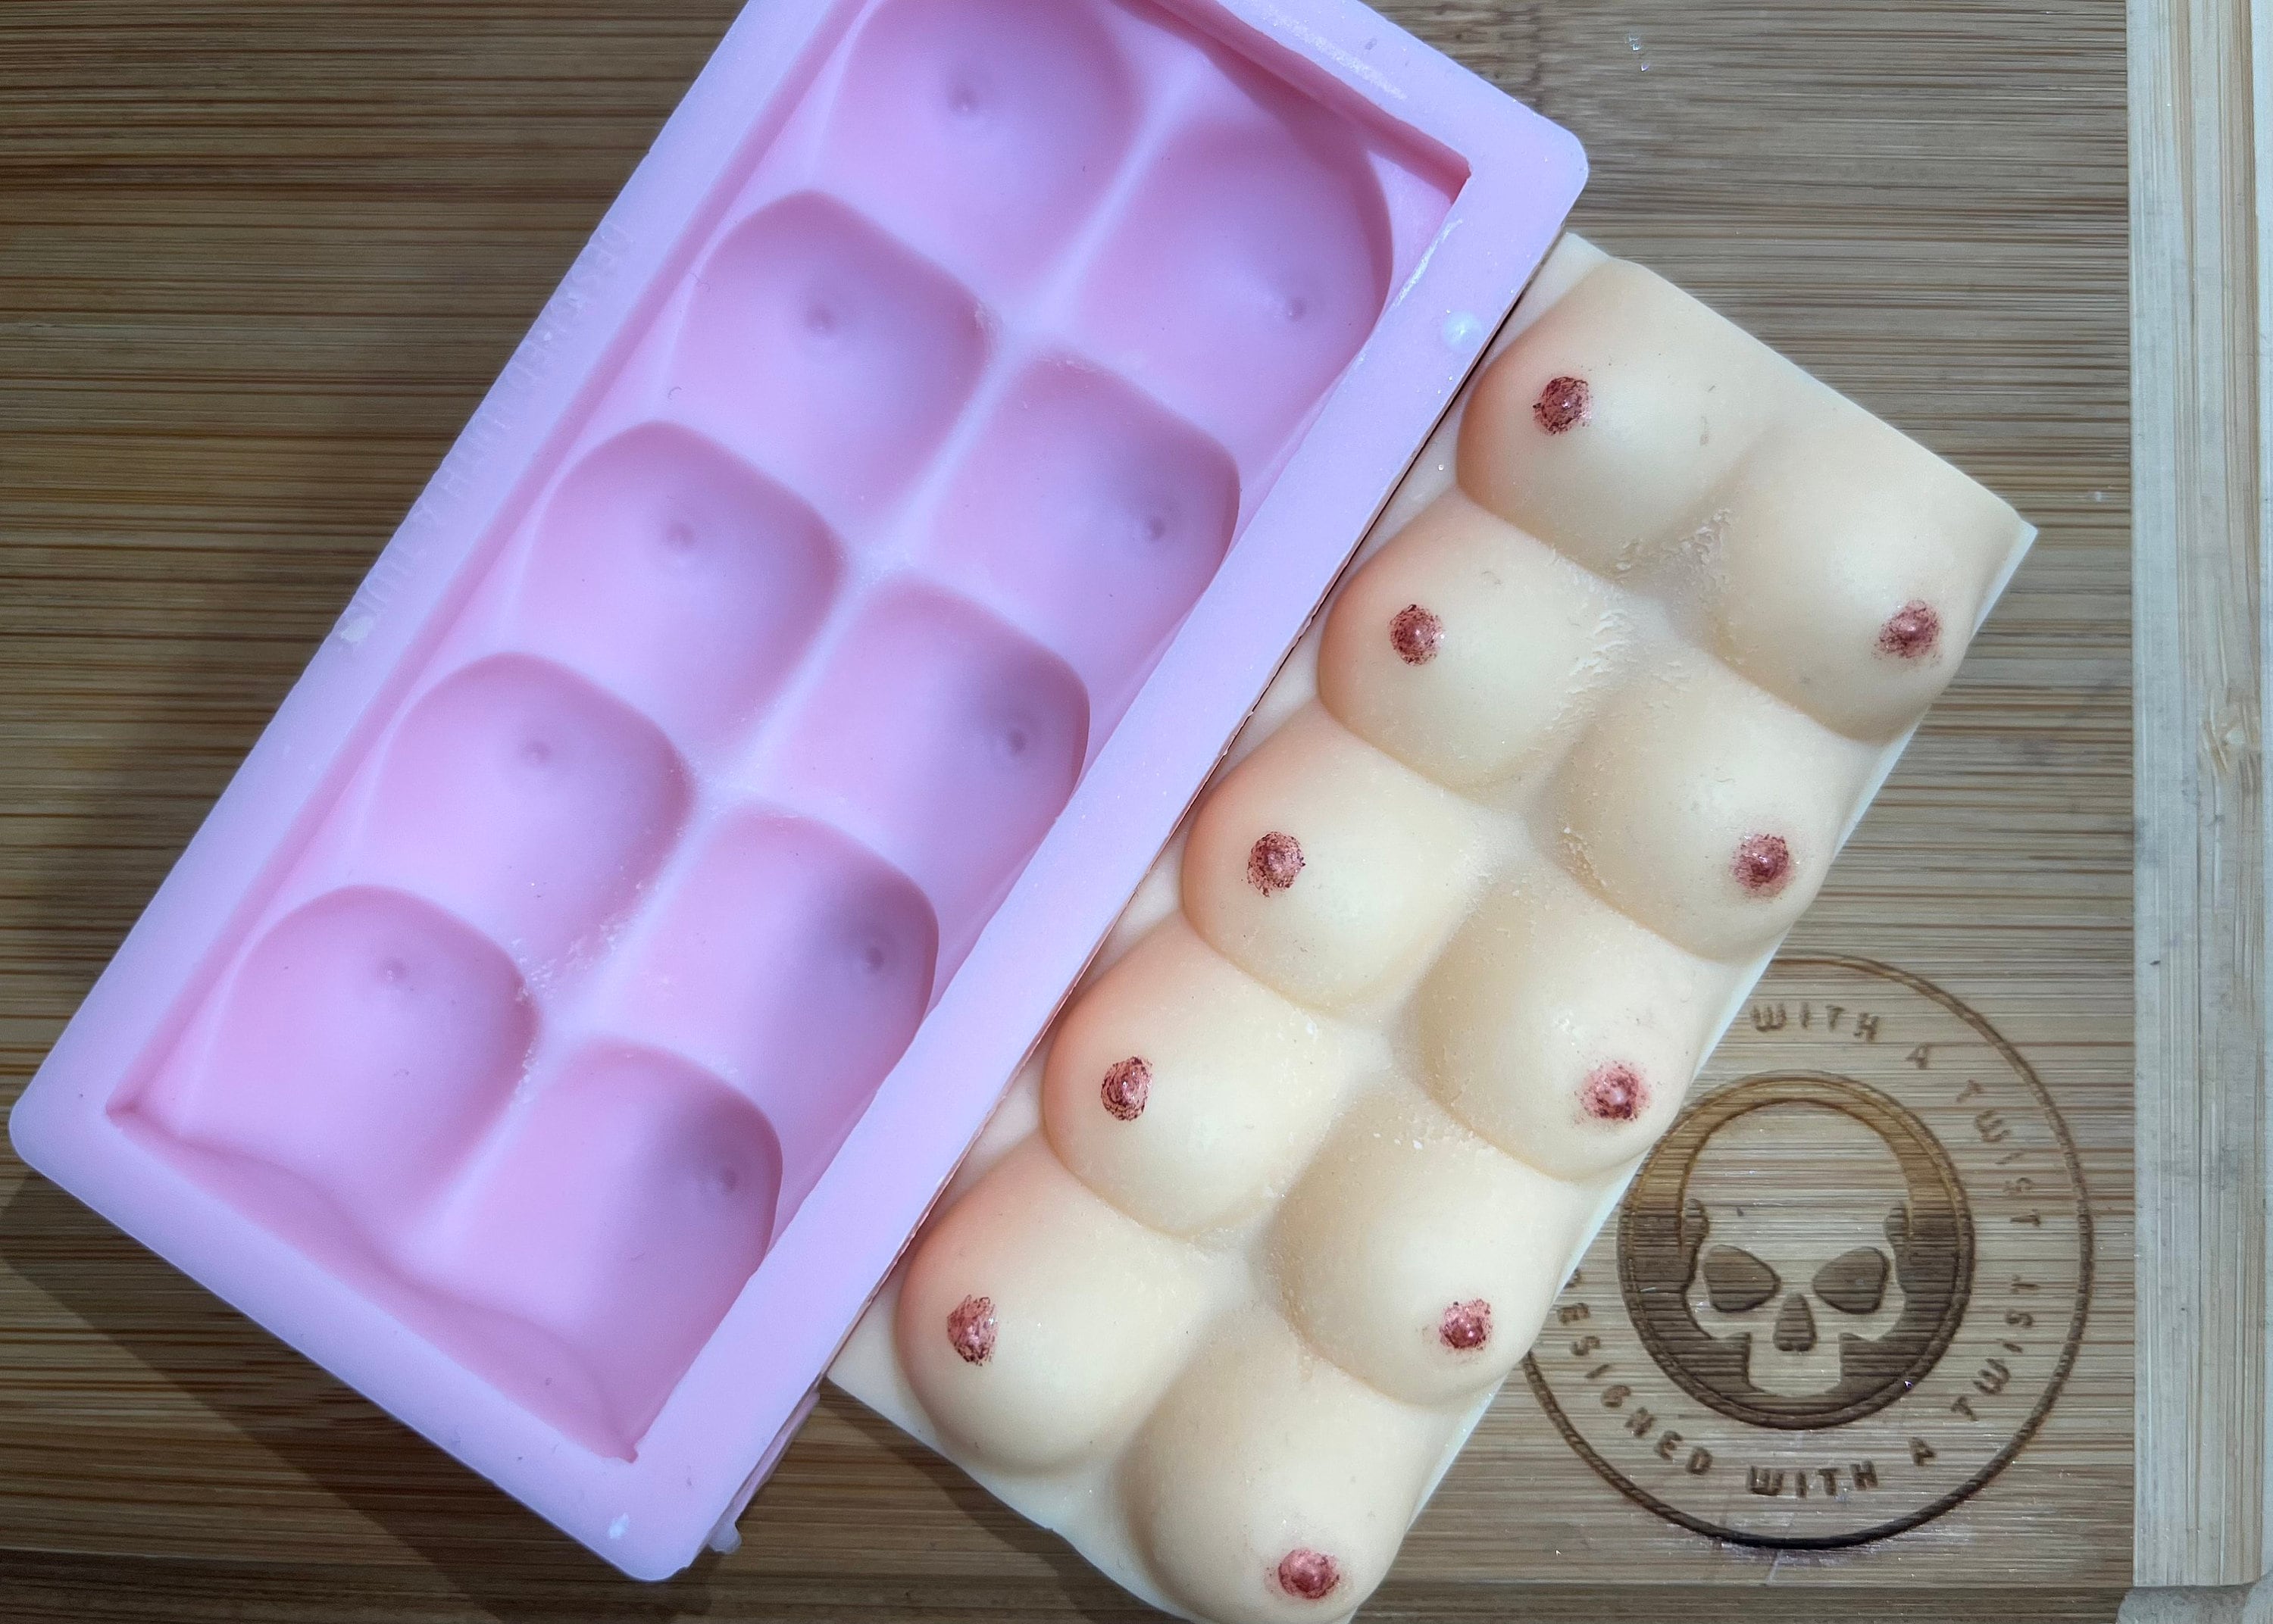 Boobie Snapbar Silicone Mold for Wax. Breast Wax Melt Silicone Mould. 